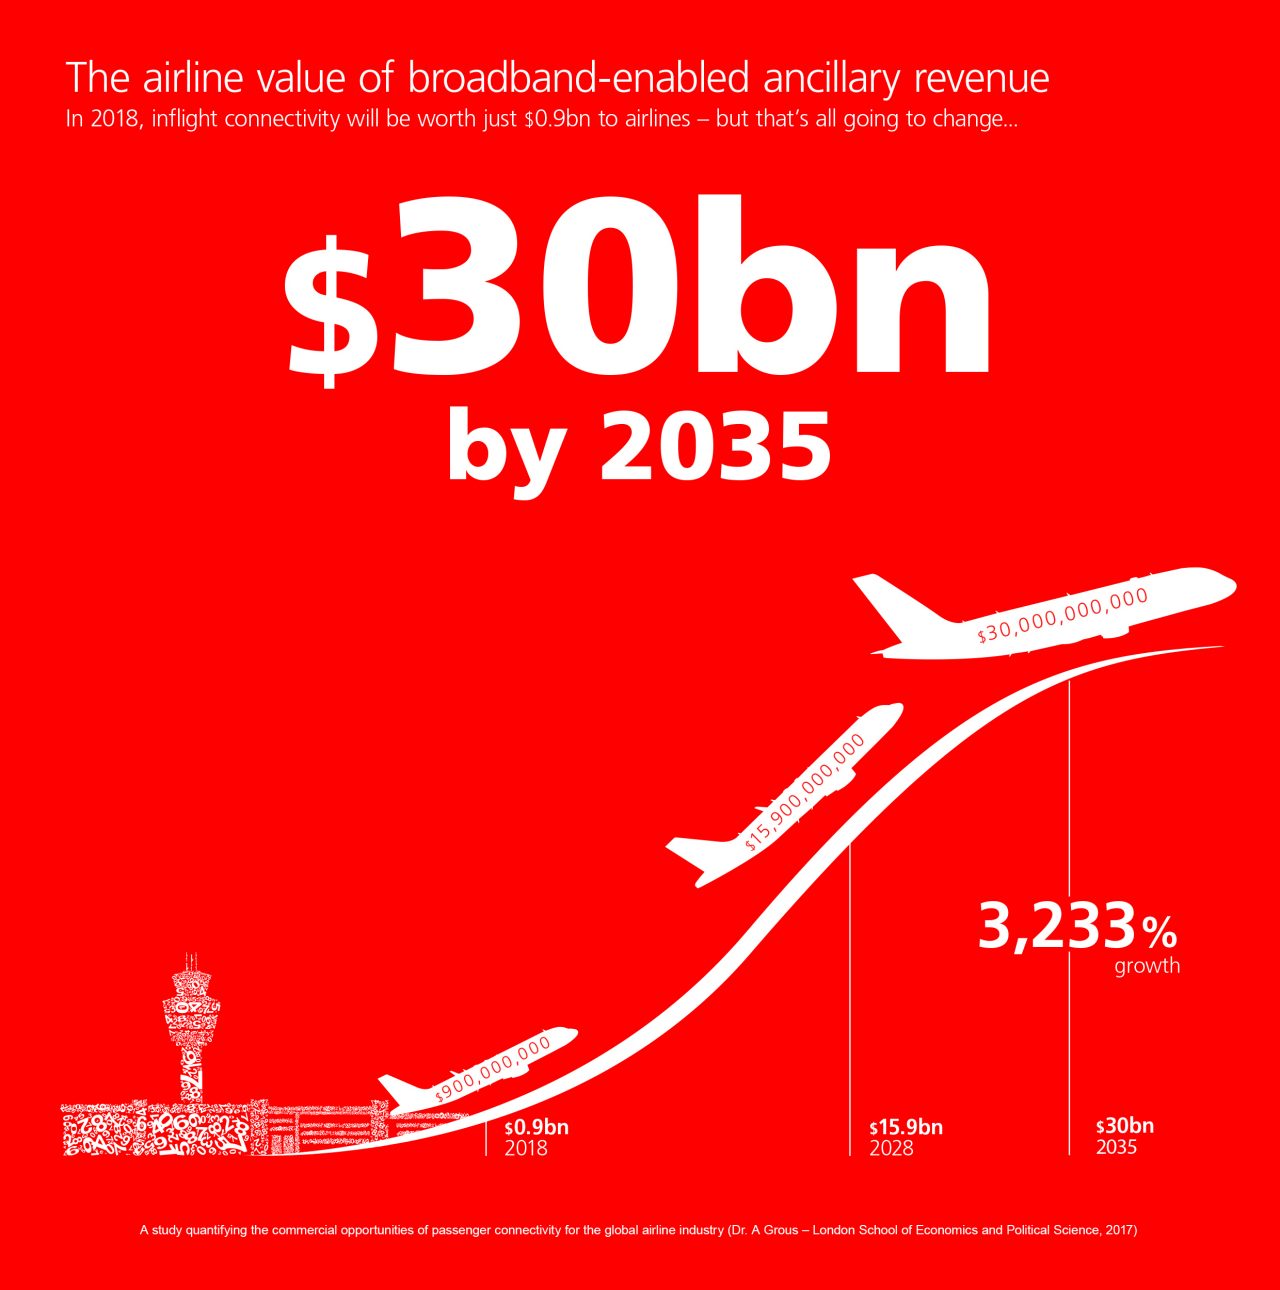 Infographic showing forecast growth of ancillary revenue